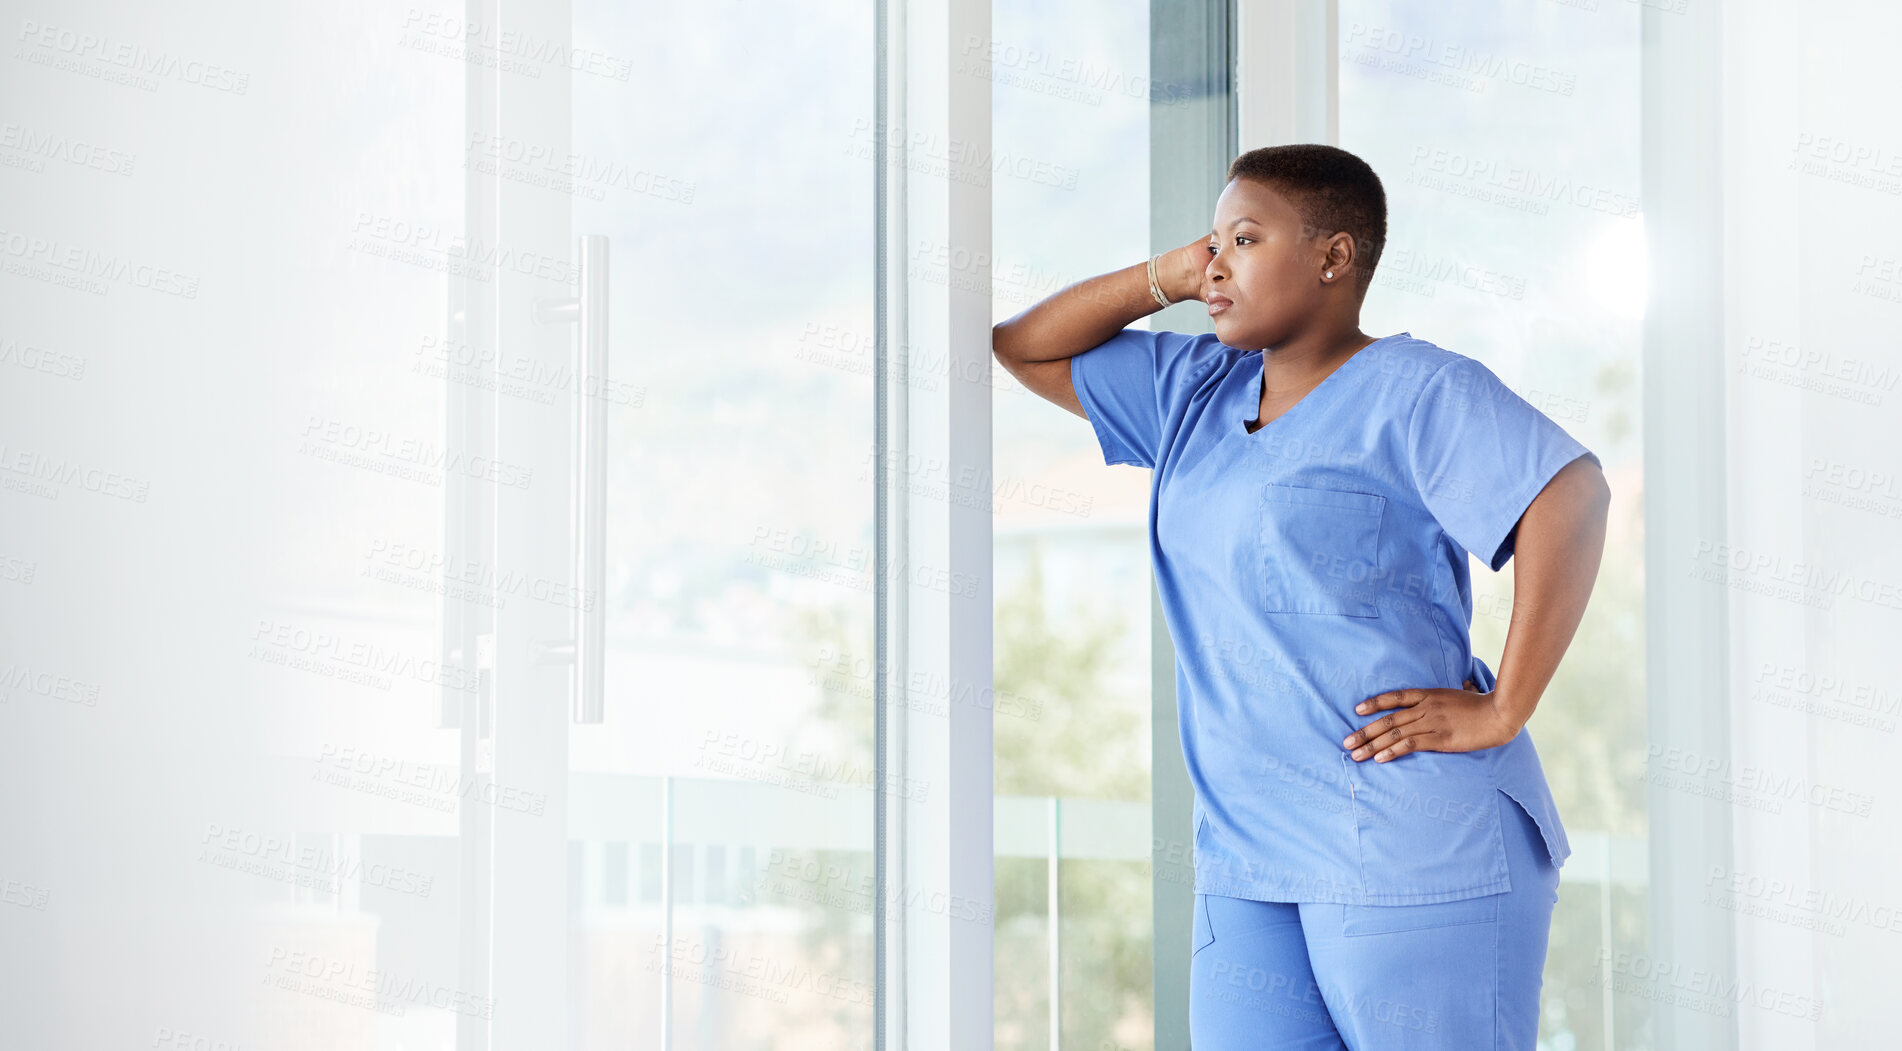 Buy stock photo Shot of a female nurse looking stressed while standing in a hospital